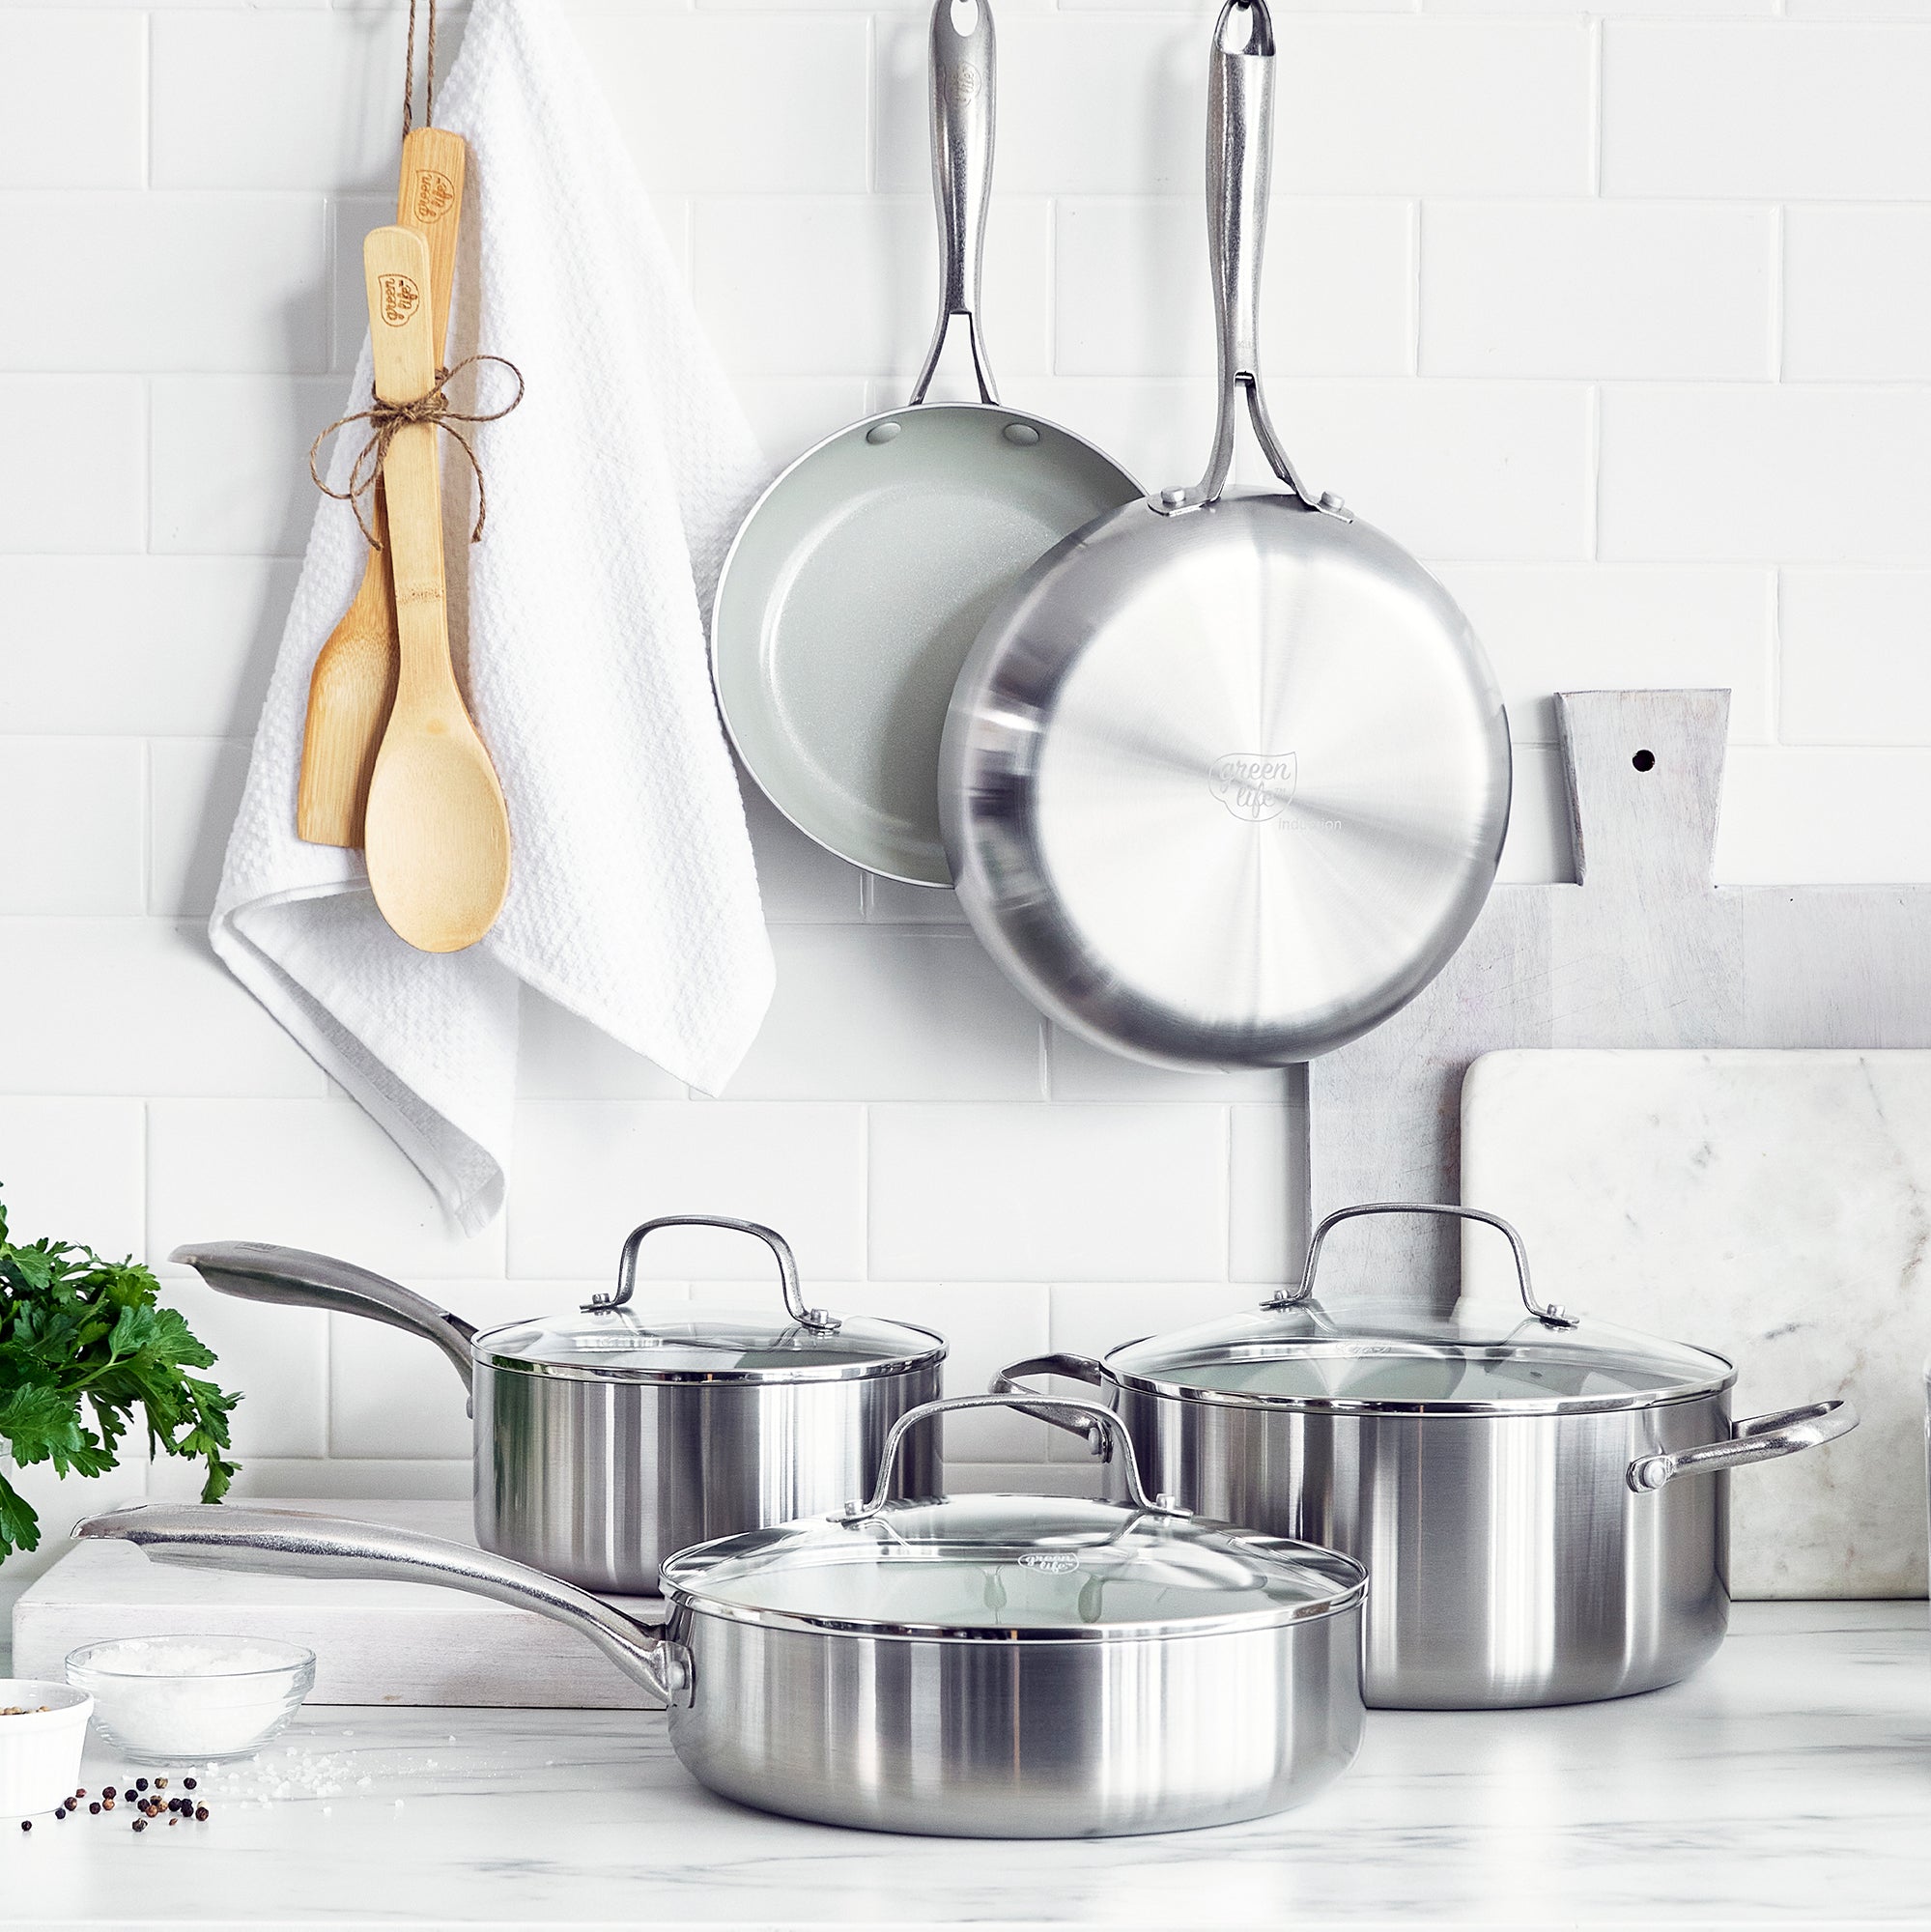 GreenLife Cookware Review - Shop With Me Mama